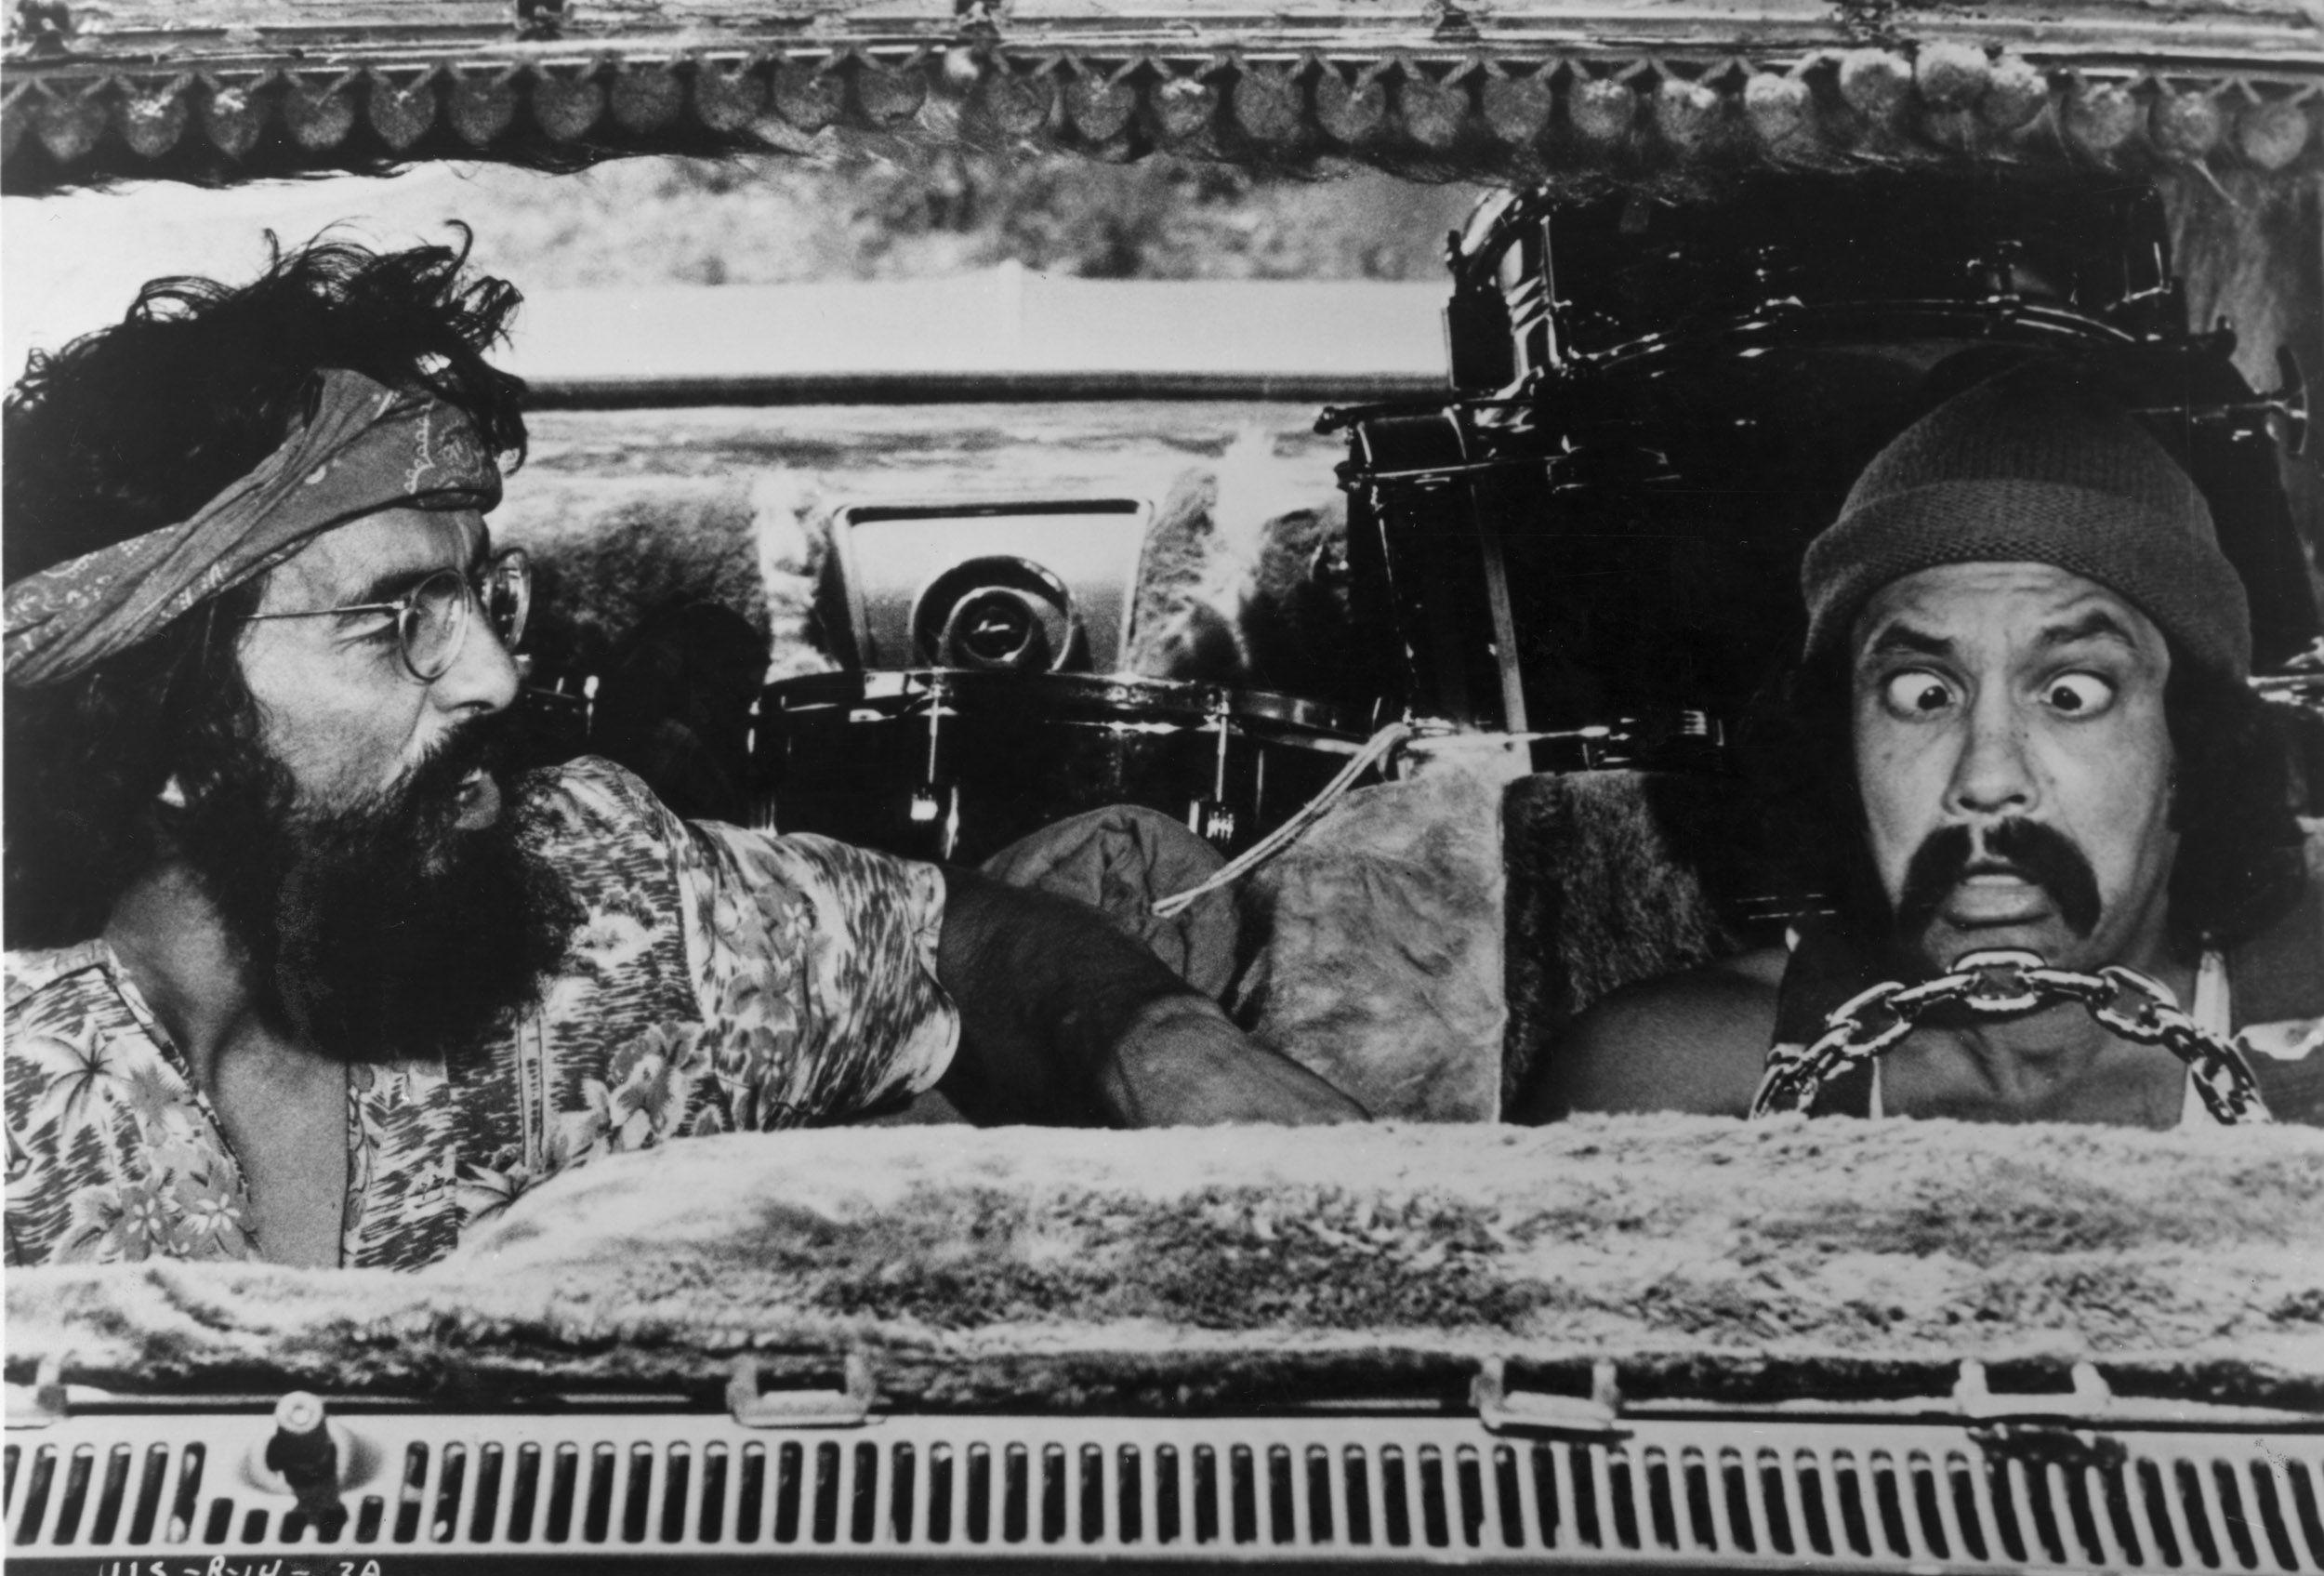 Cheech marin and tommy chong, also known as the comedy duo cheech & cho...